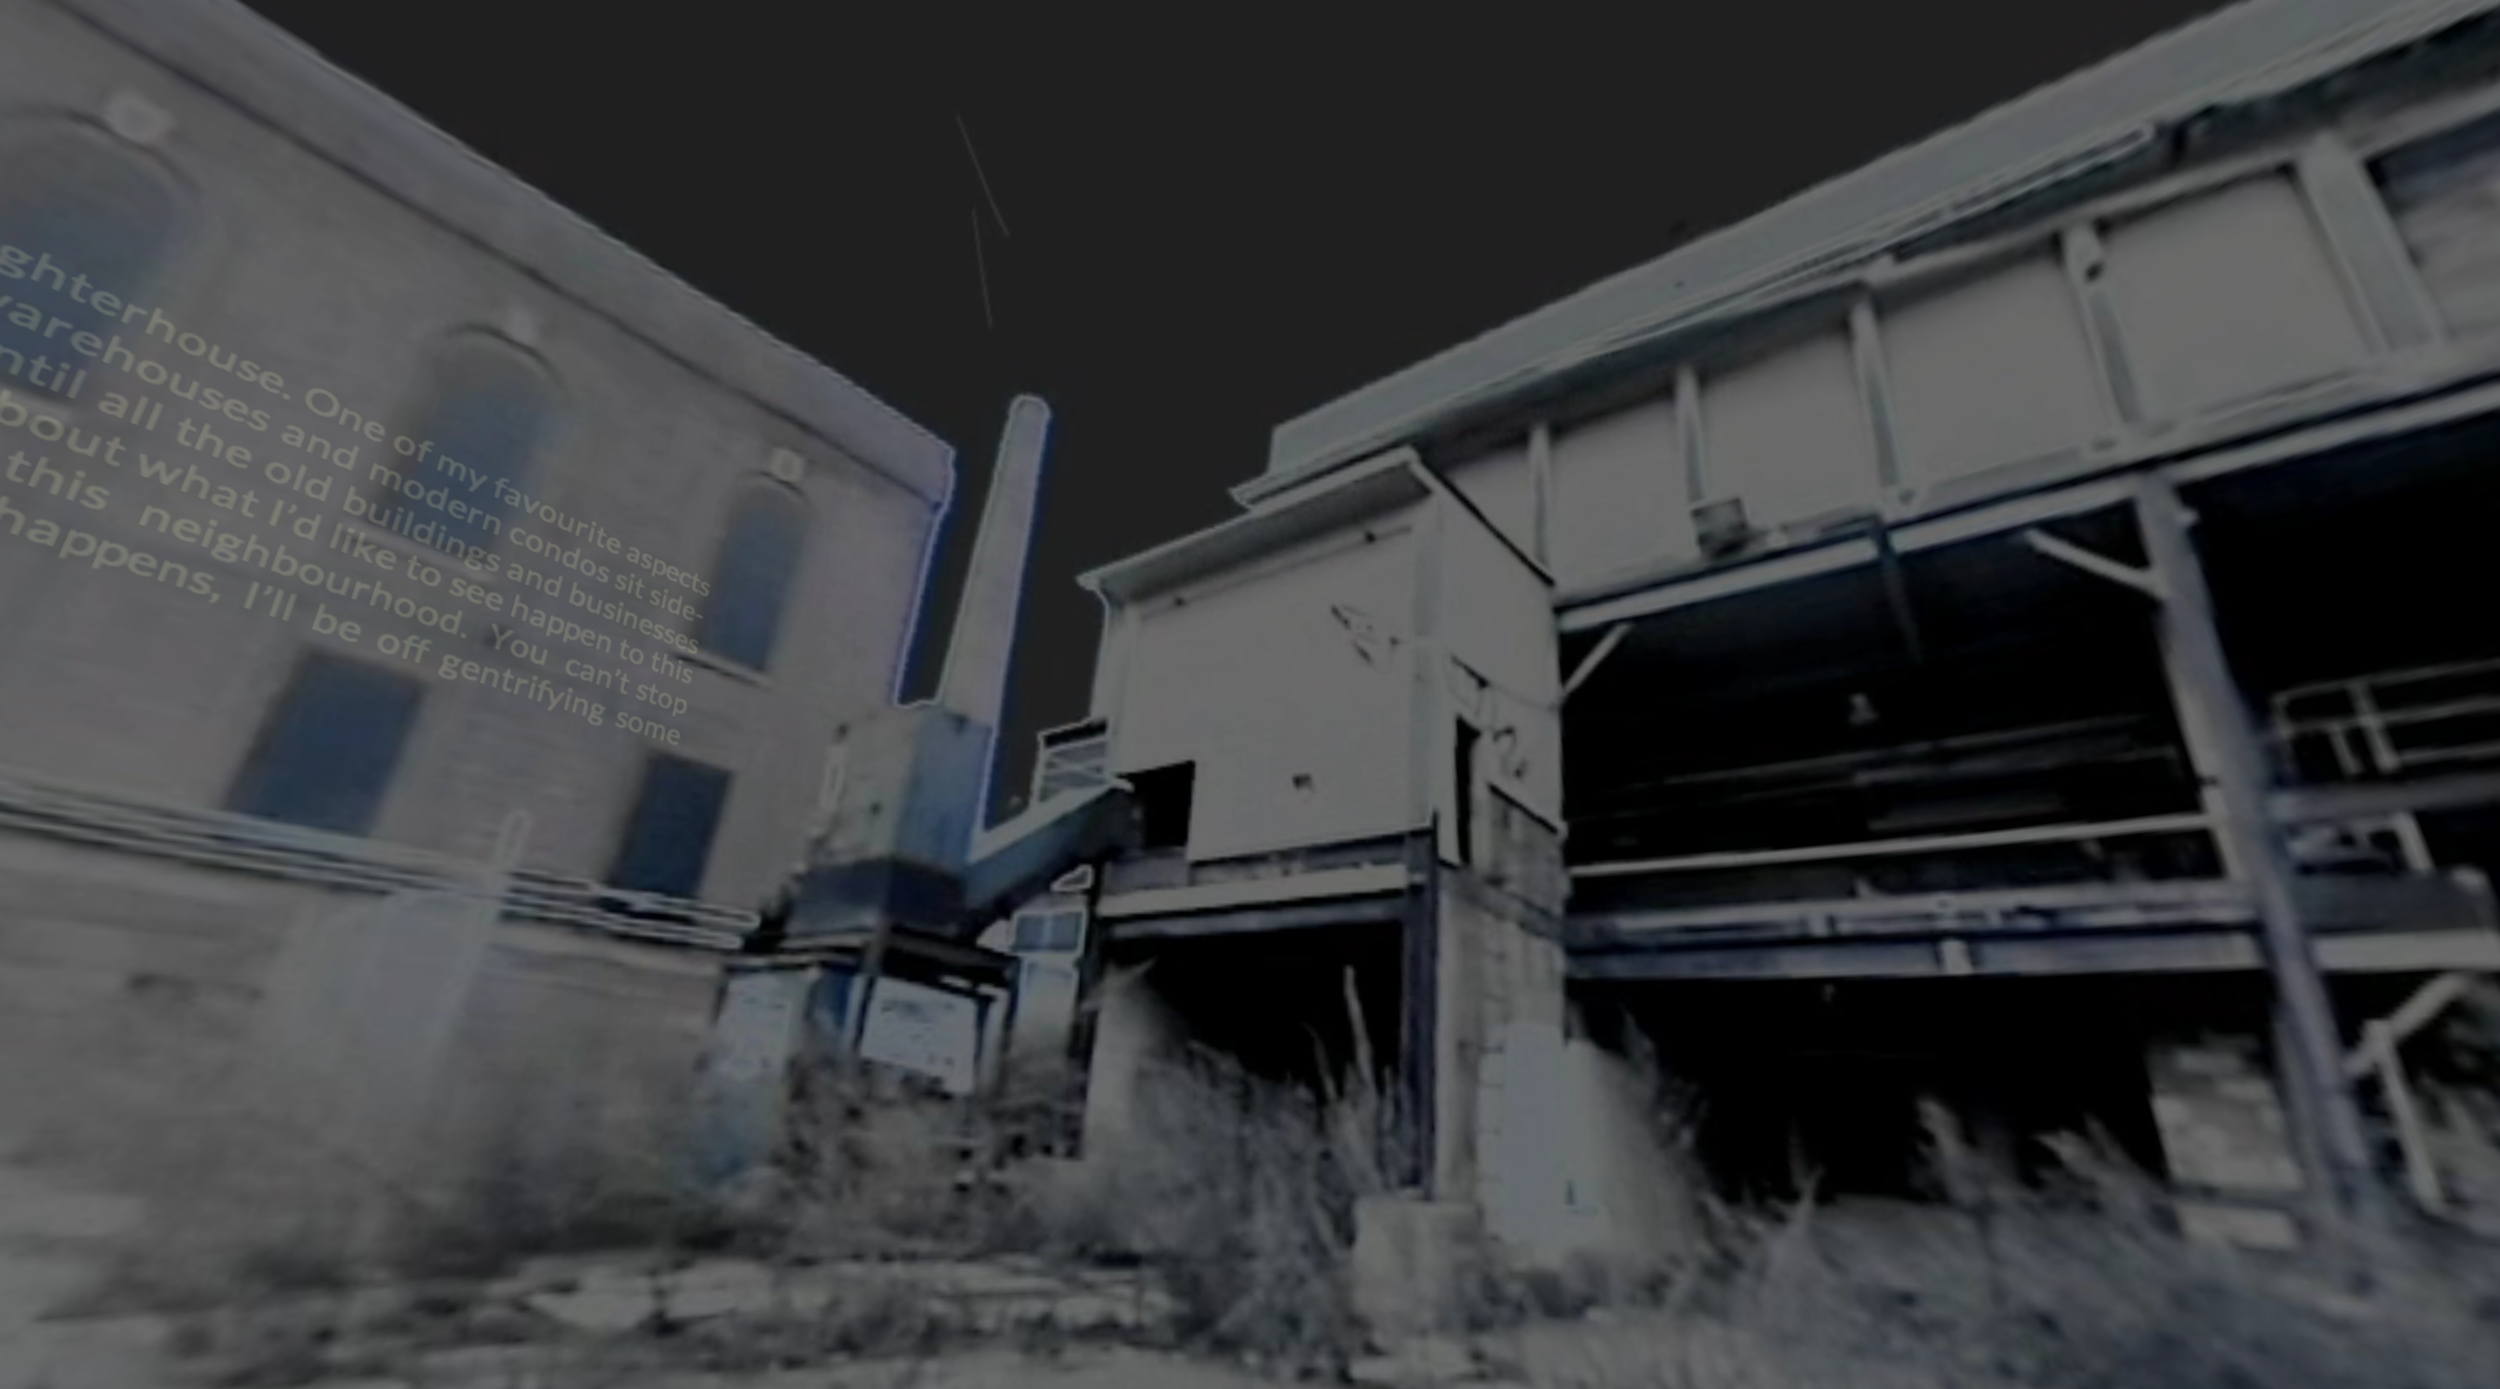  Hogtown Sensory Archive is an interactive archive in VR that explores the multiple histories and communities surrounding Toronto’s last operating abattoir. The project is located on the site of the new abandoned Quality Meat Packers plant, in operat